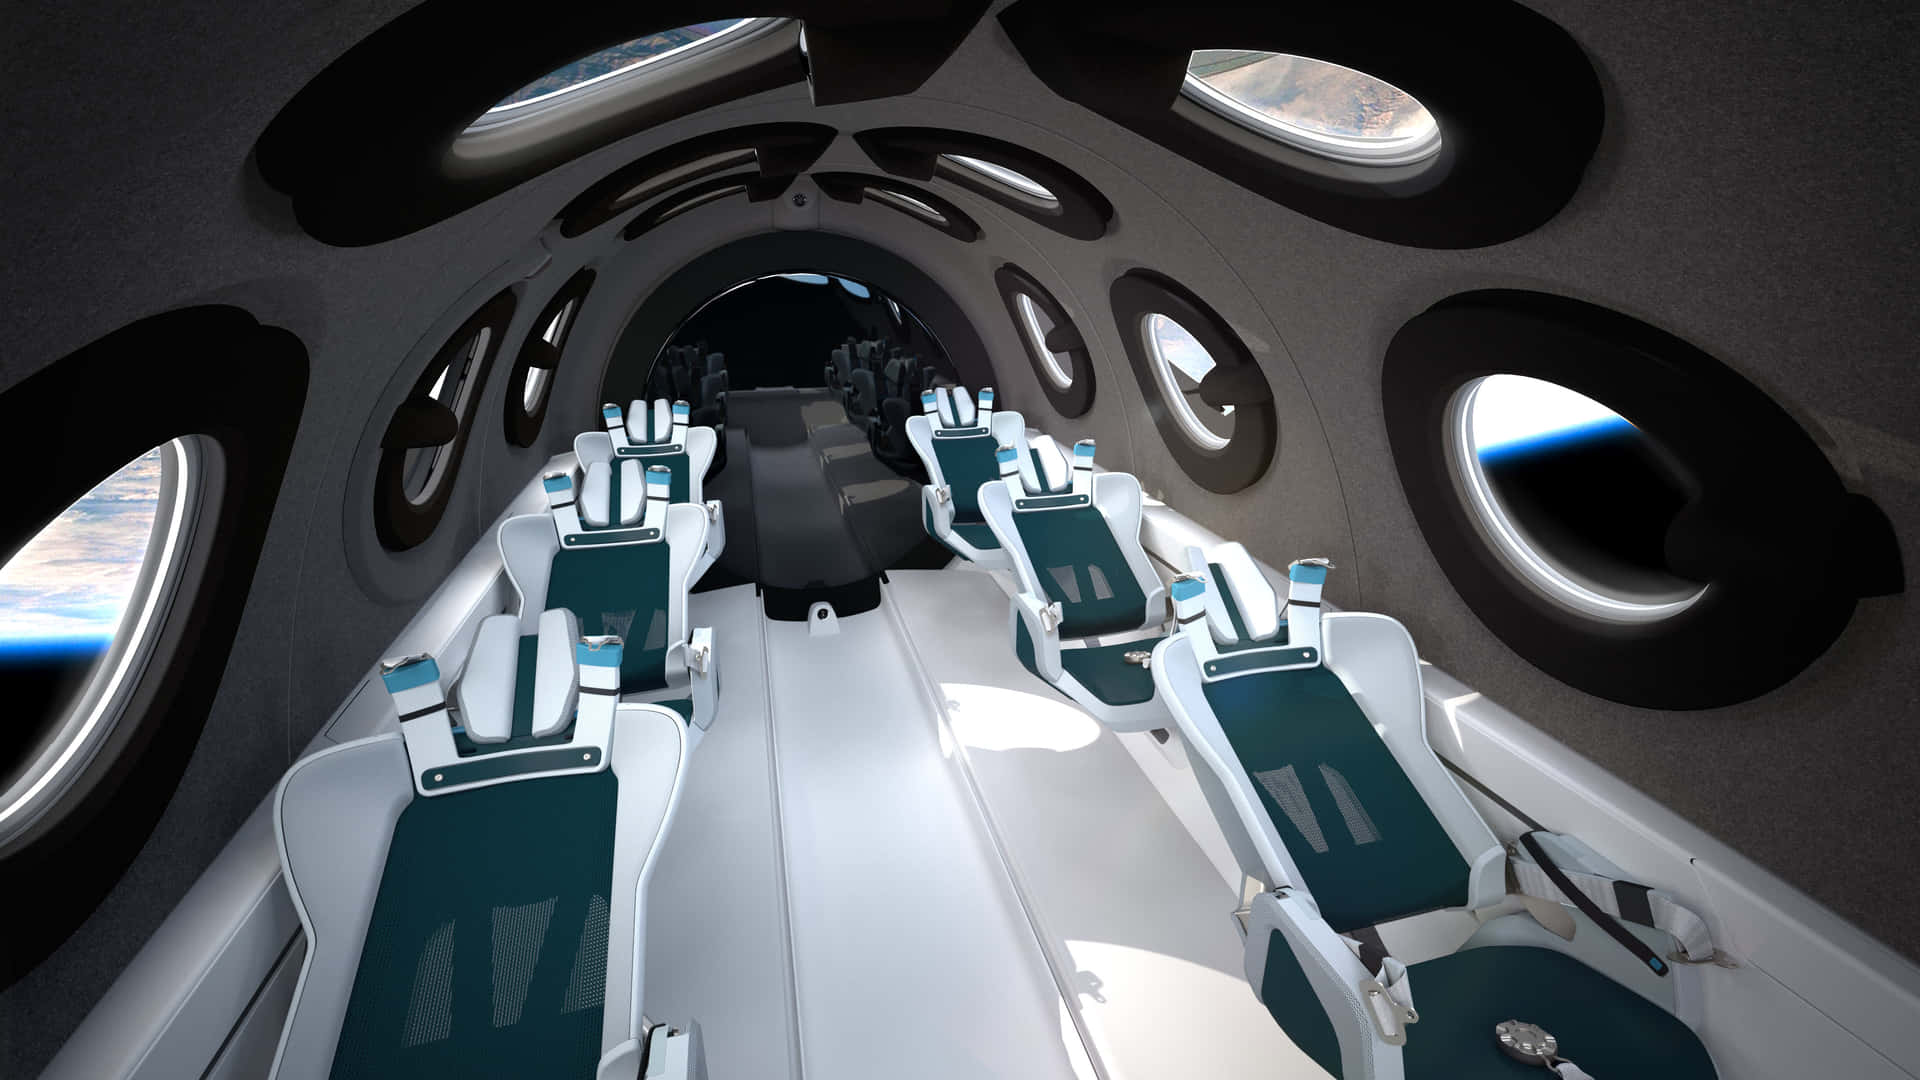 Supercharge your space travel dreams with Spaceship